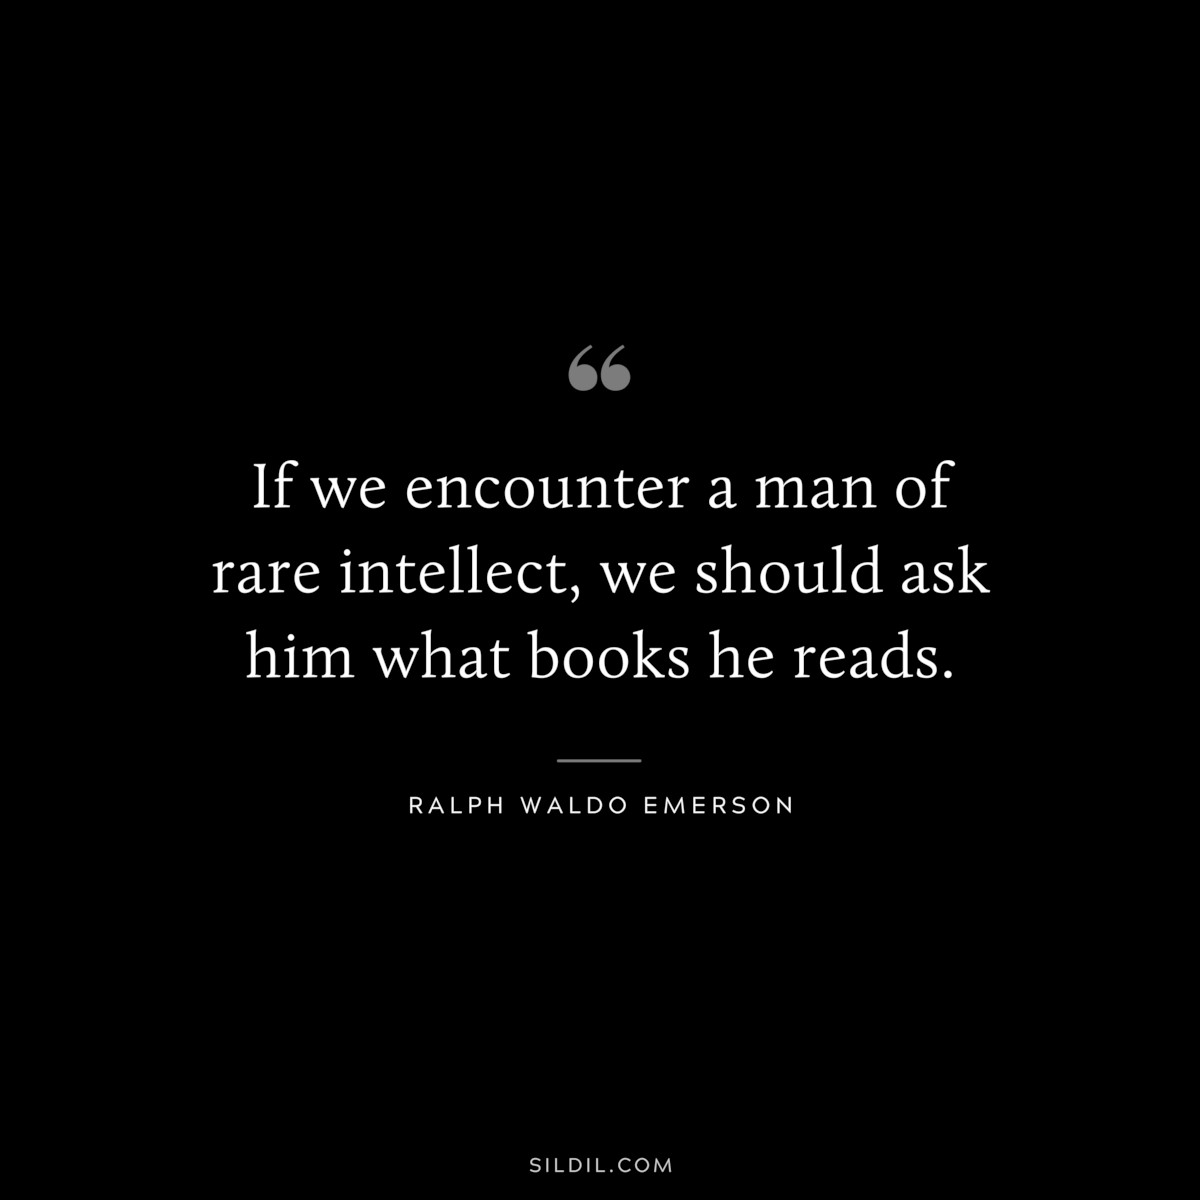 If we encounter a man of rare intellect, we should ask him what books he reads. — Ralph Waldo Emerson